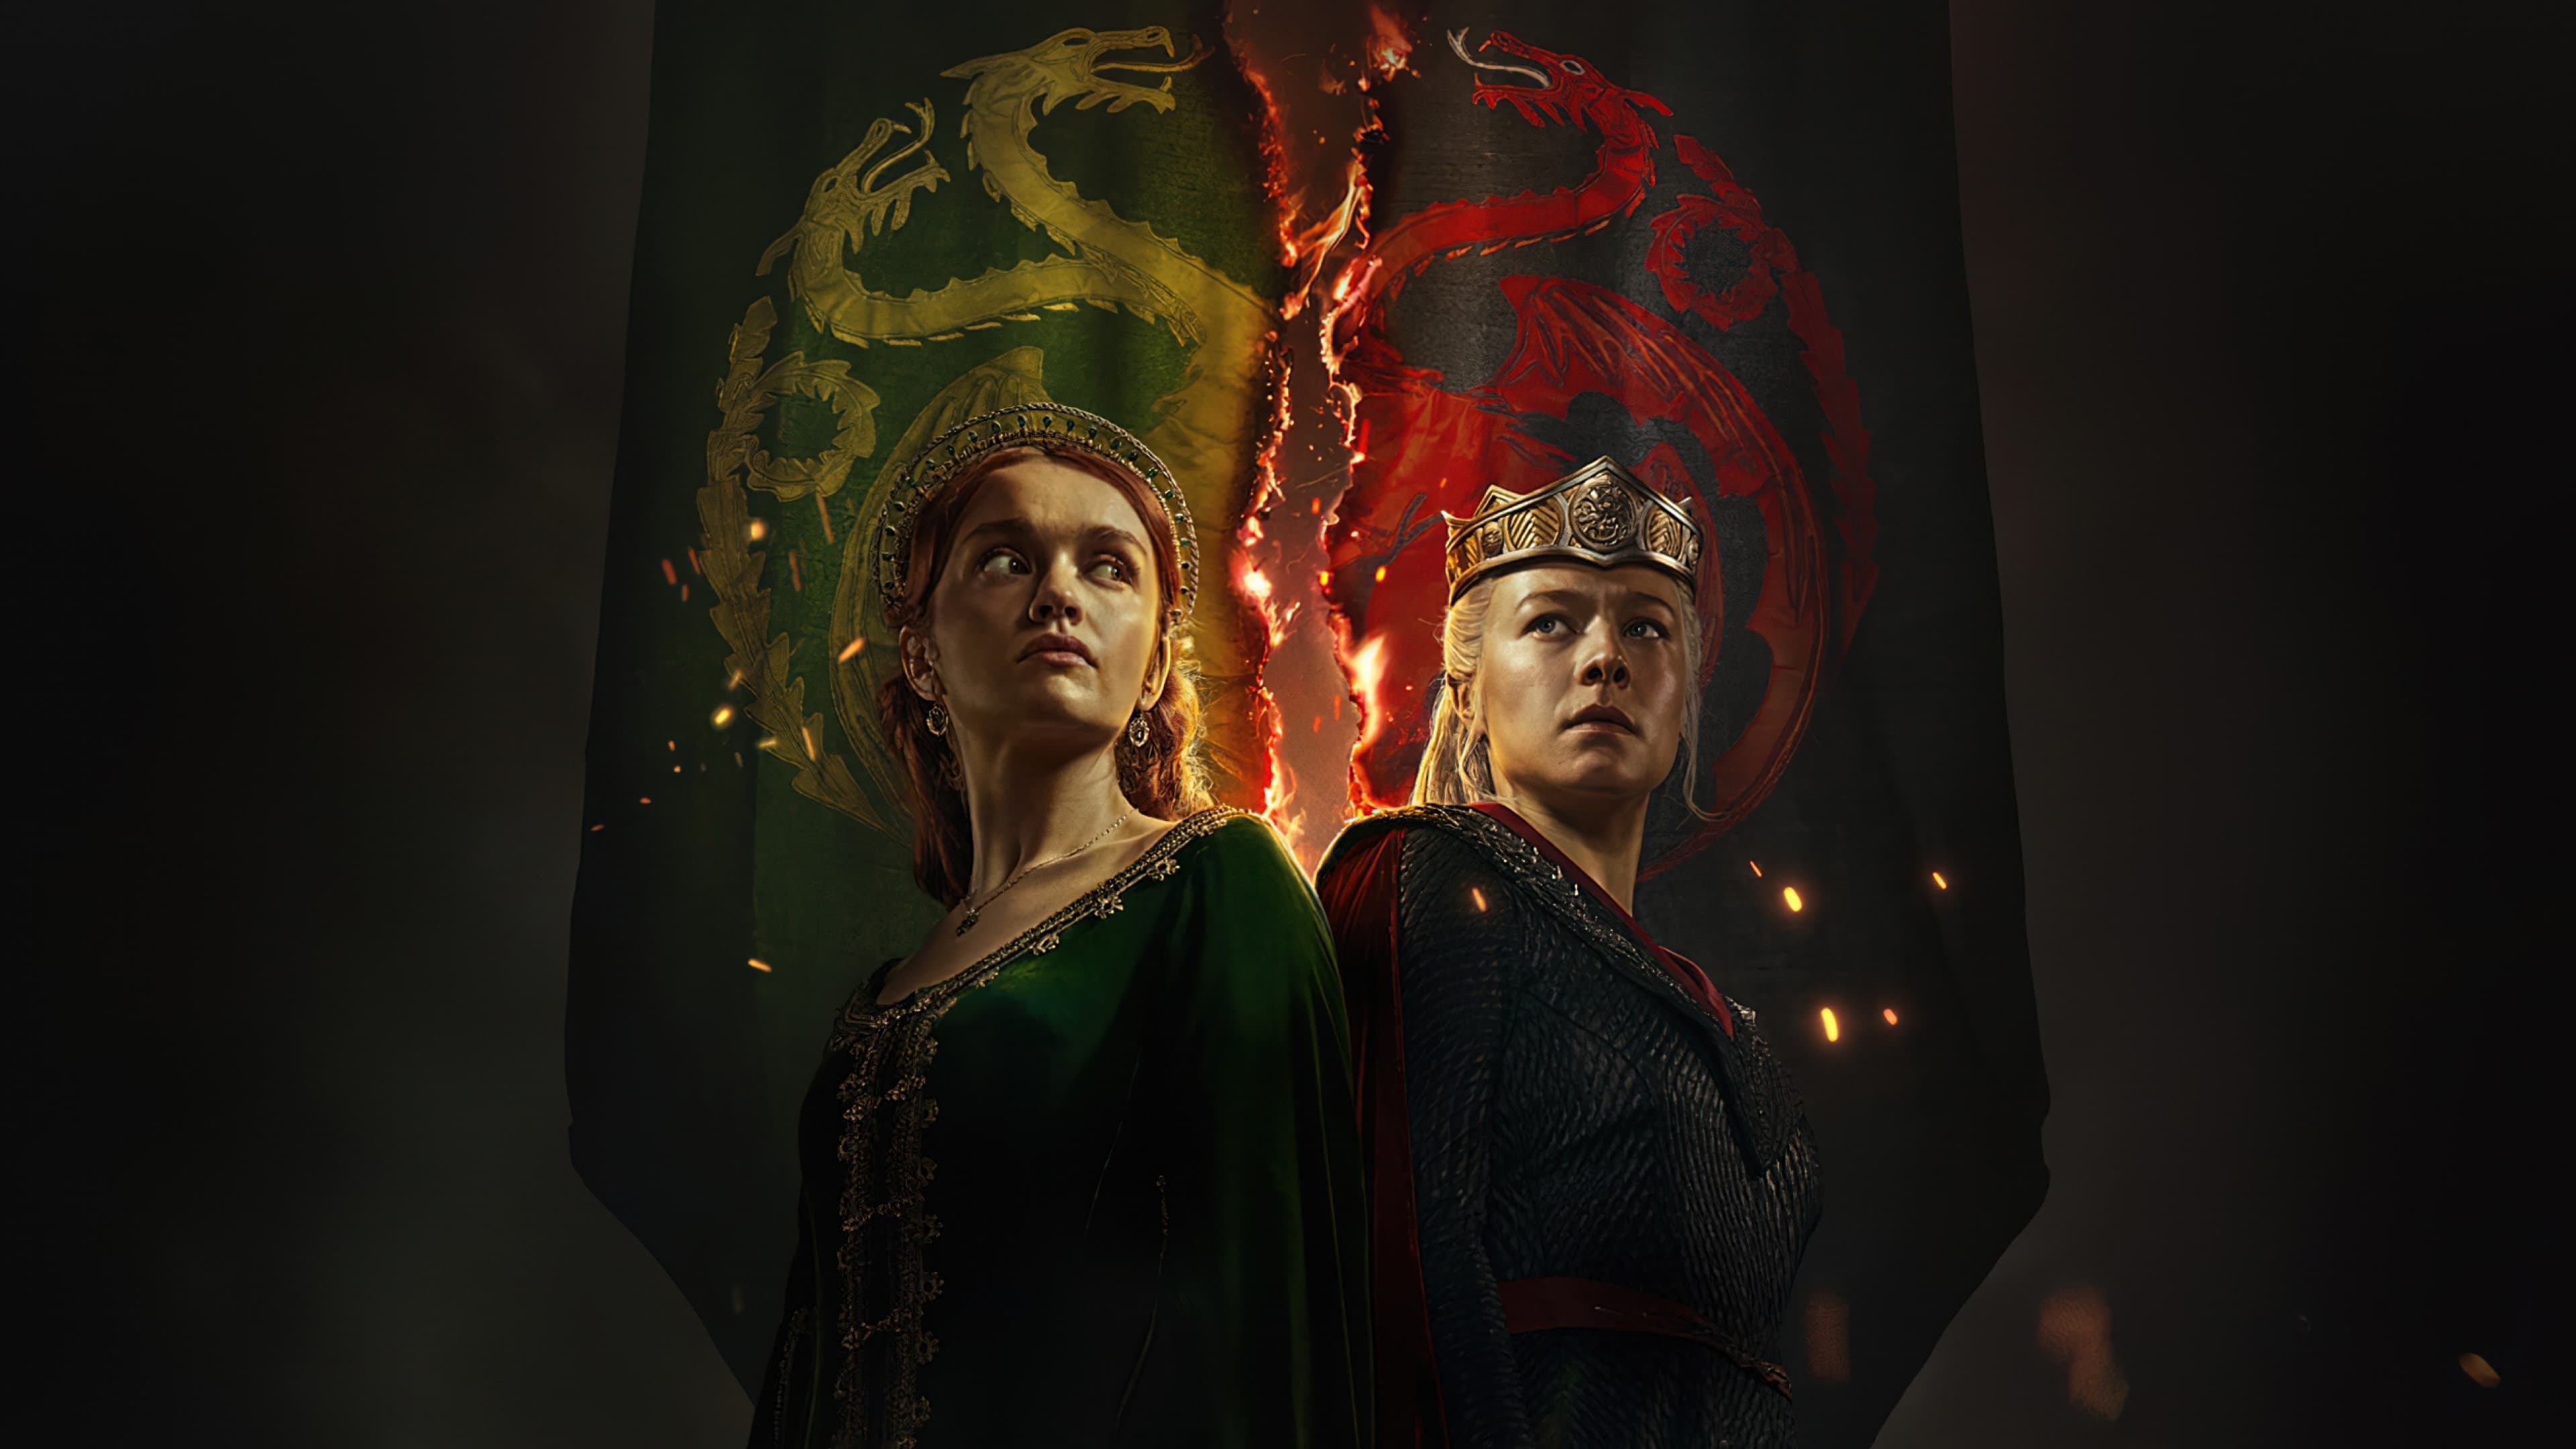 House Targaryen will never be the same following the Dance of Dragons.